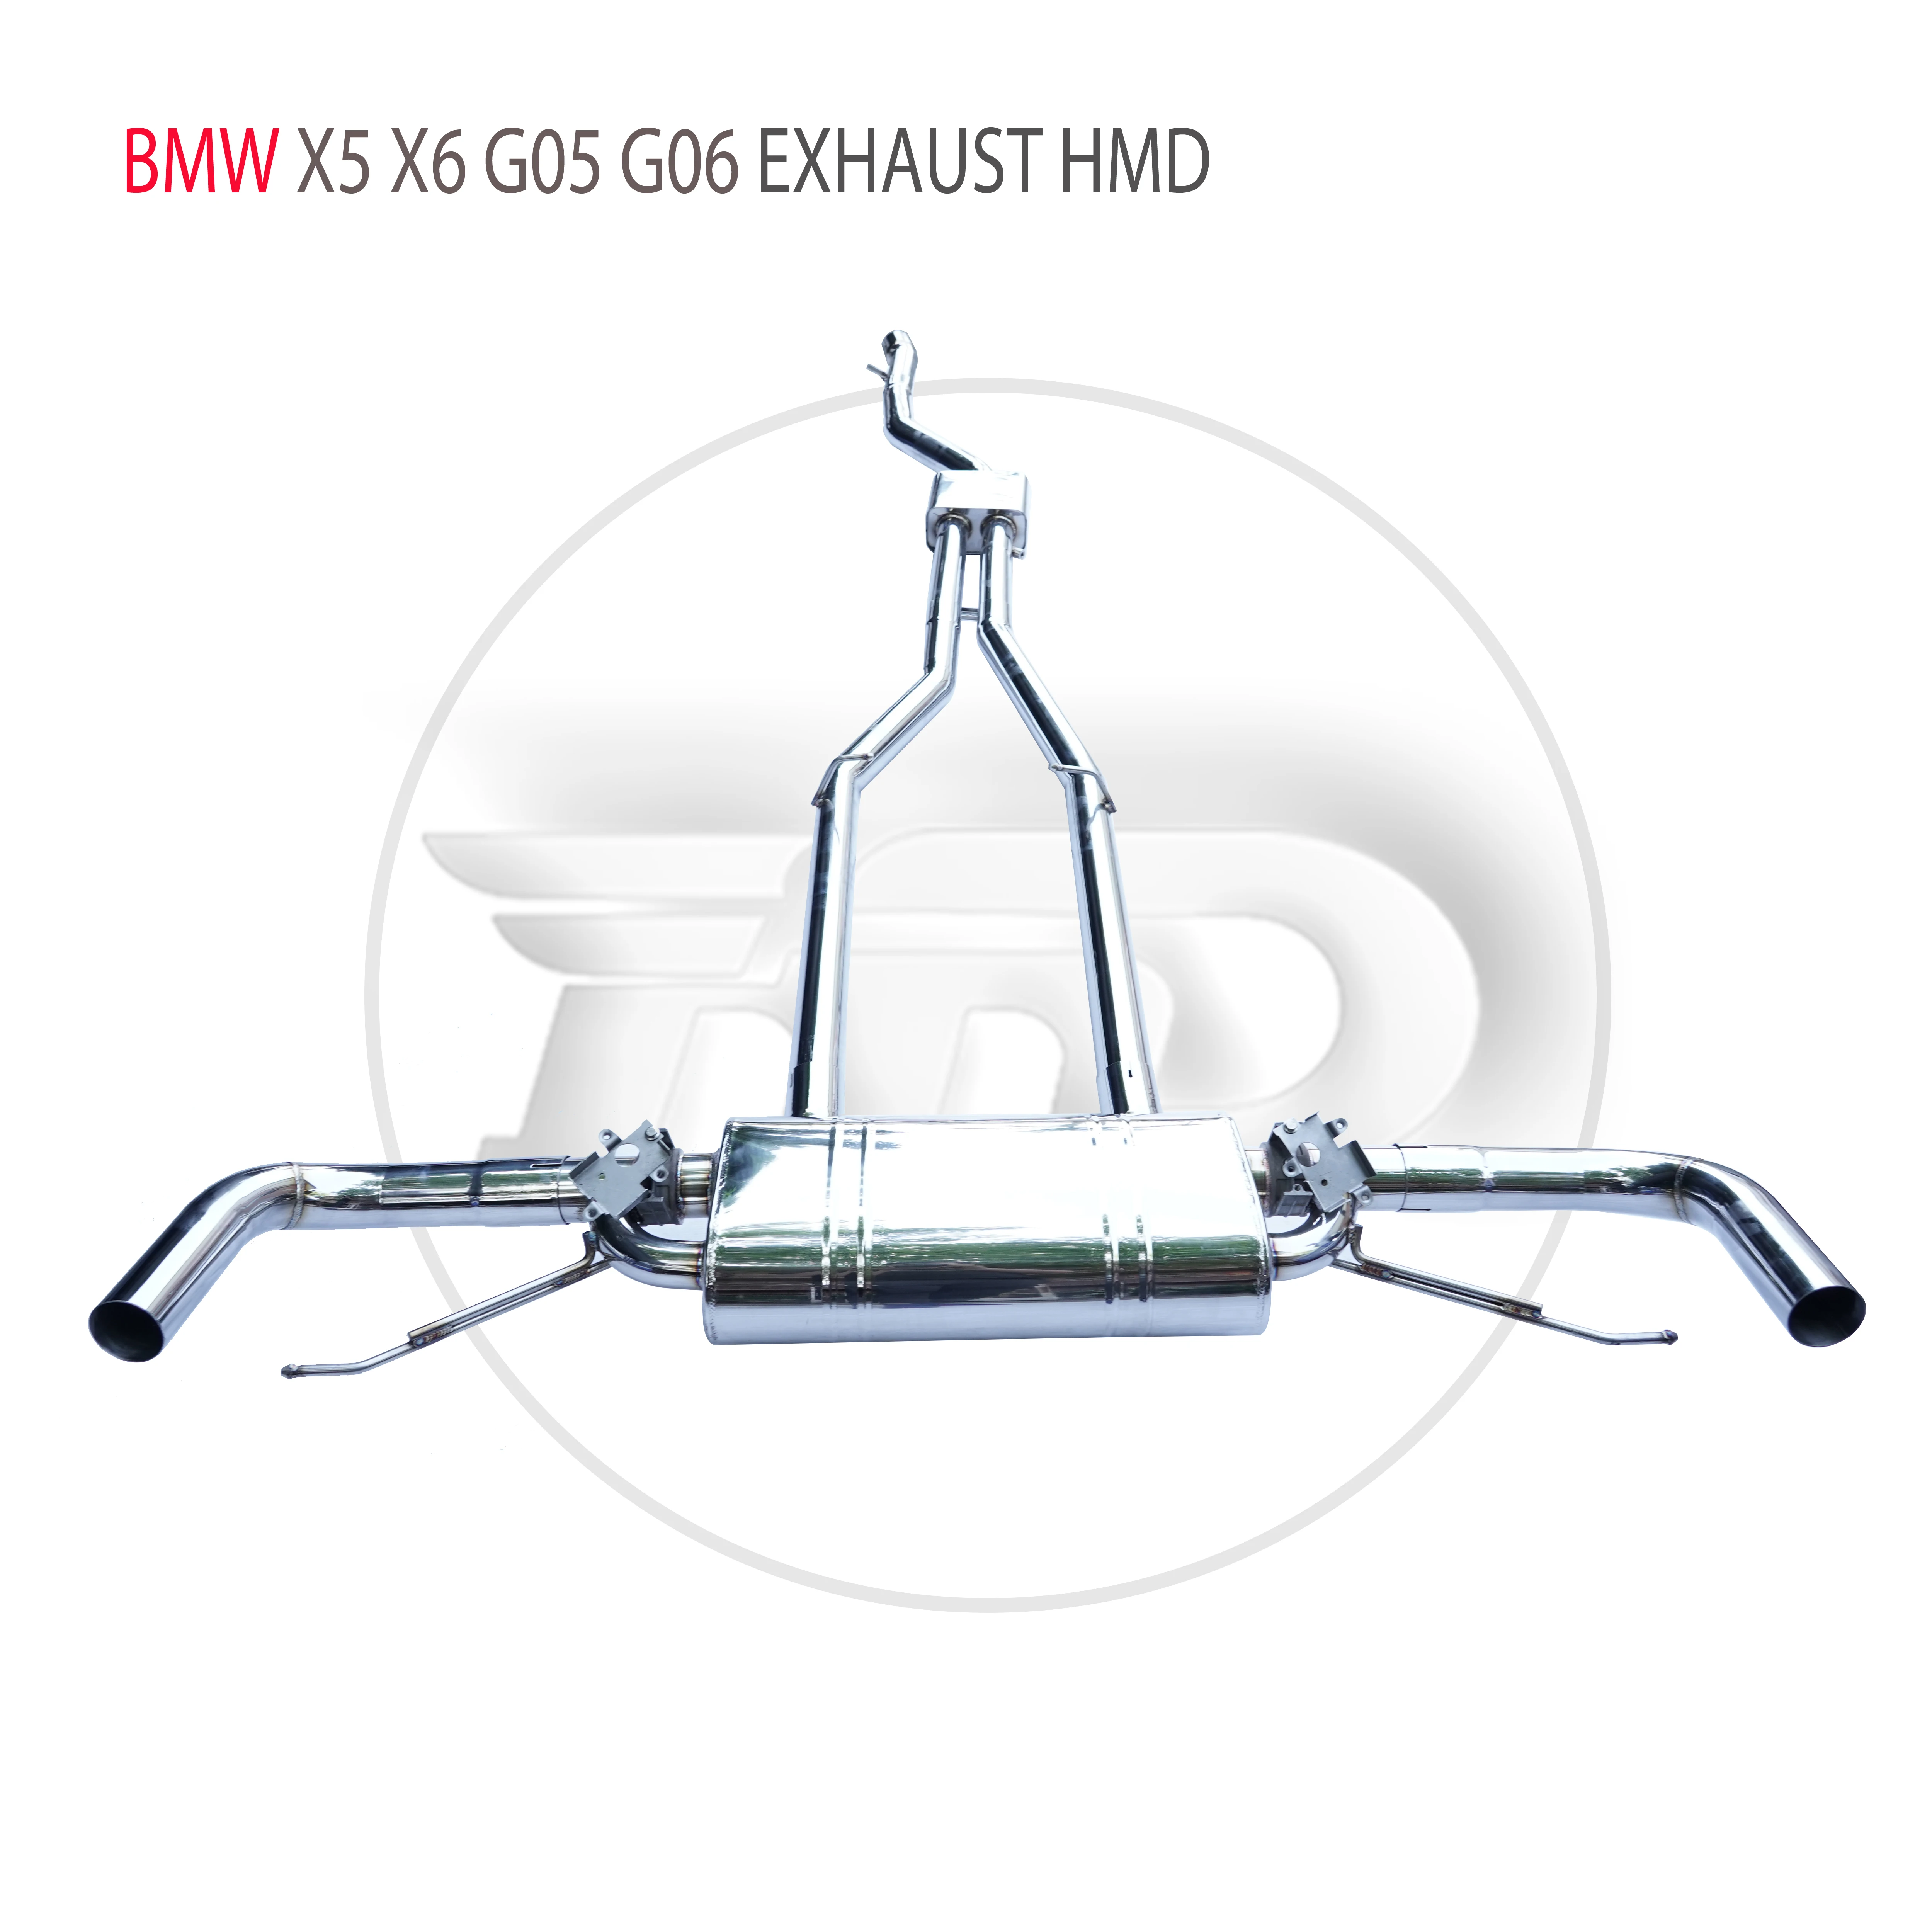 

HMD Stainless Steel Exhaust System Performance Catback for BMW X5 X6 G05 G06 Replacement Modification Electronic Valve